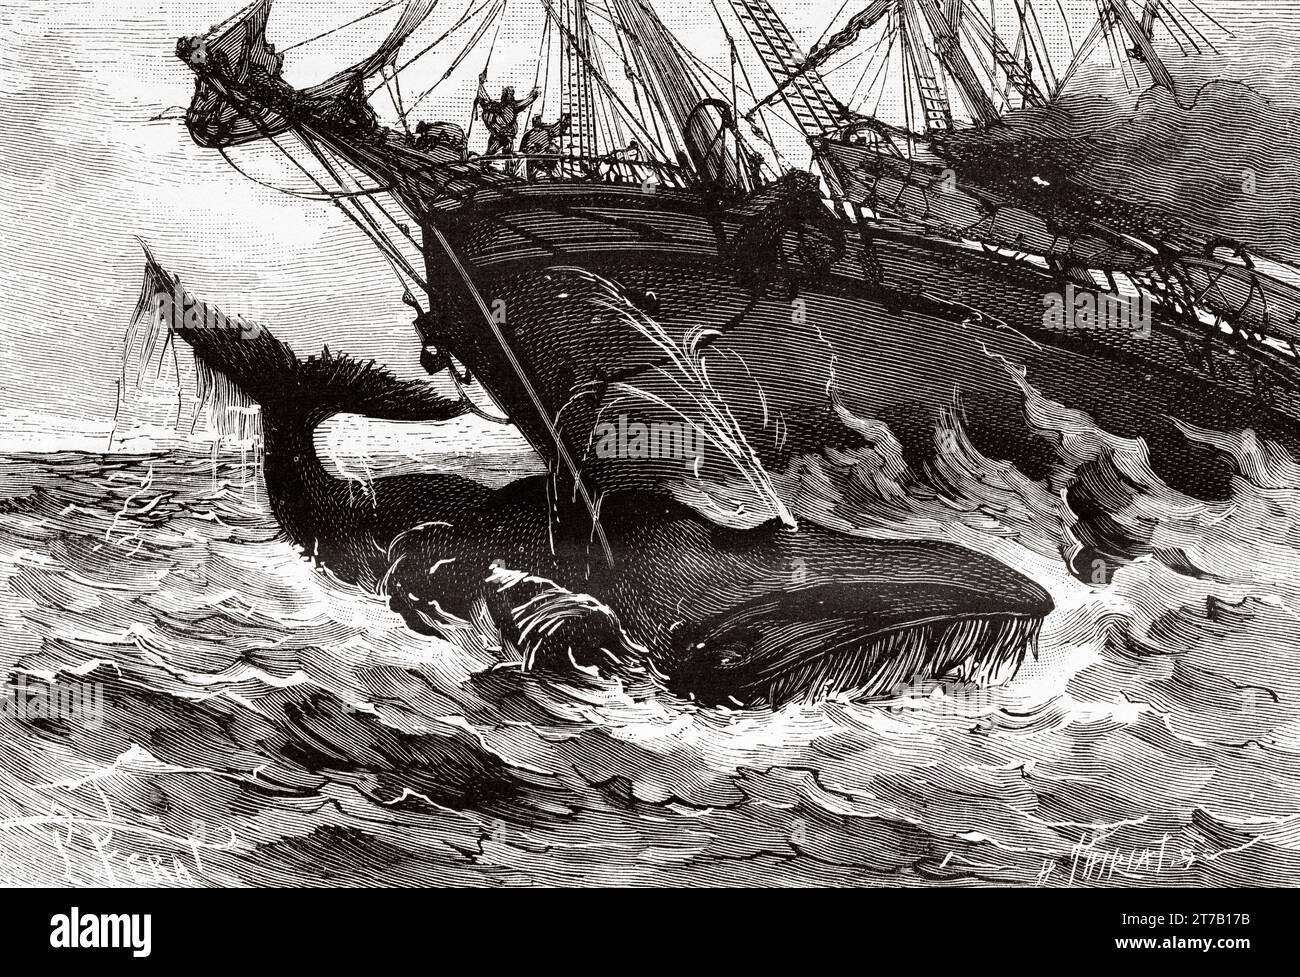 Collision of the steamer Waesland with a whale on July 13, 1886. Old illustration from La Nature 1887 Stock Photo